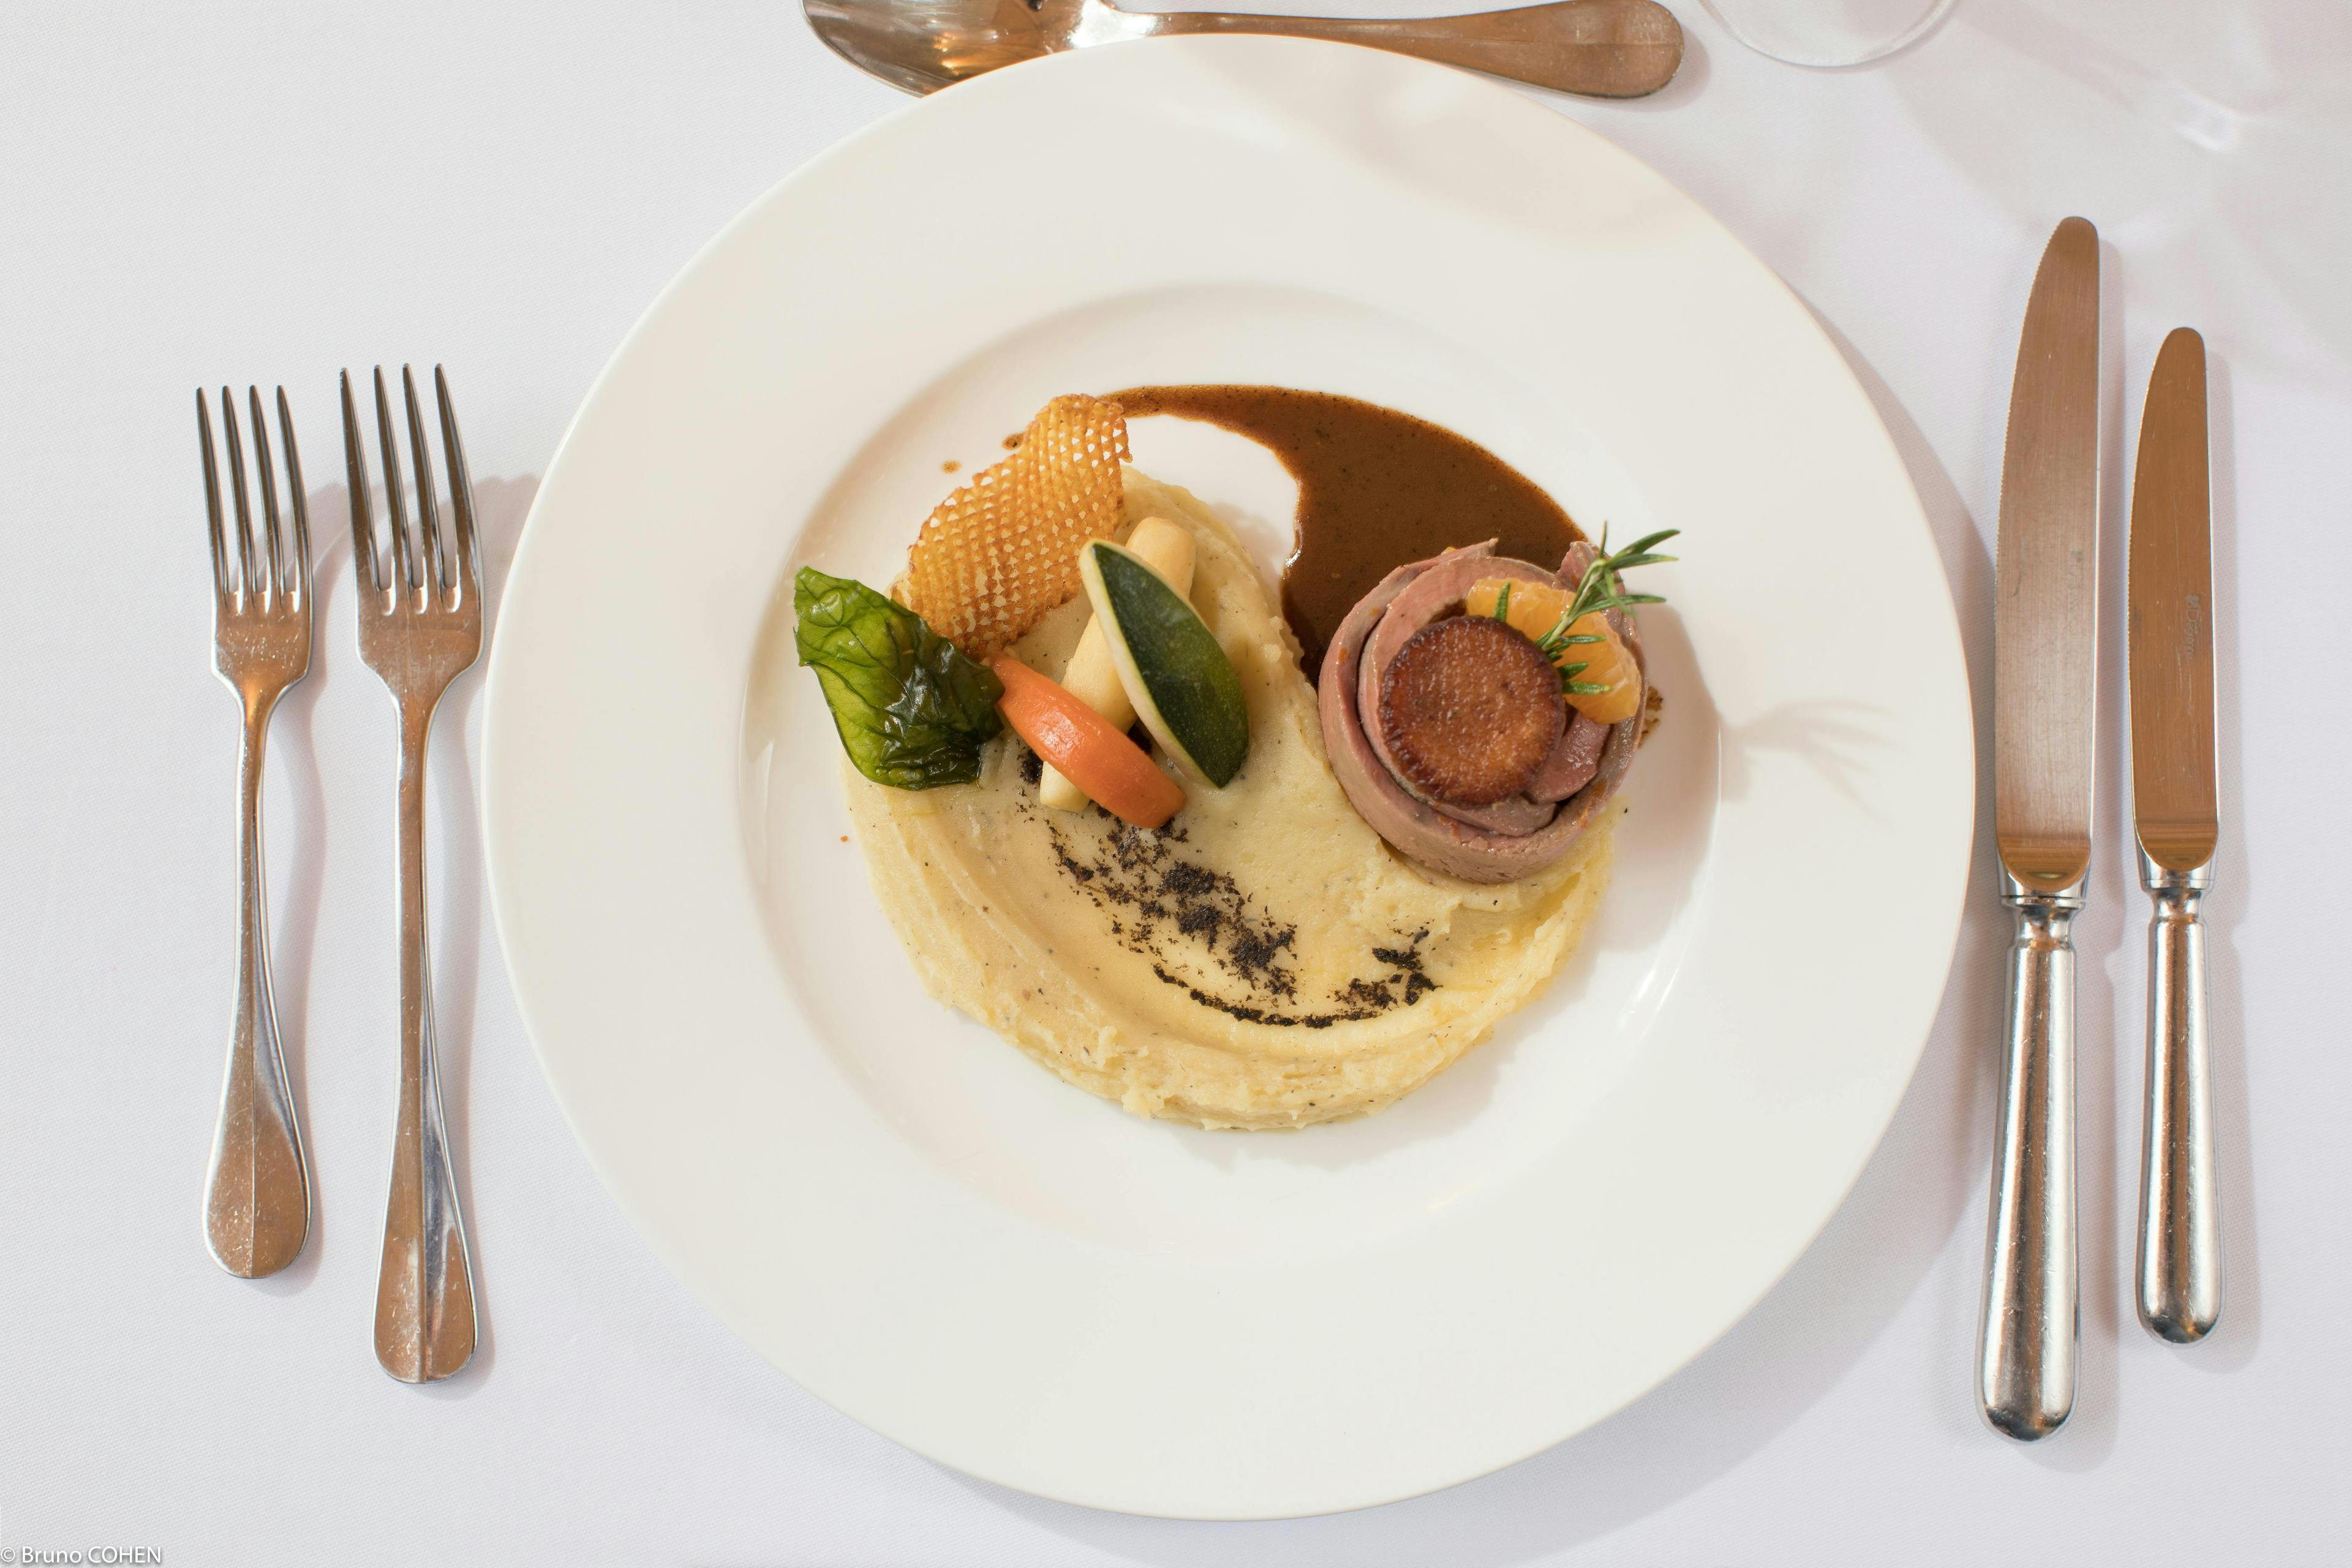 abbaye de royaumont royaumont culinaire photo culinaire fork cutlery dish meal food bread